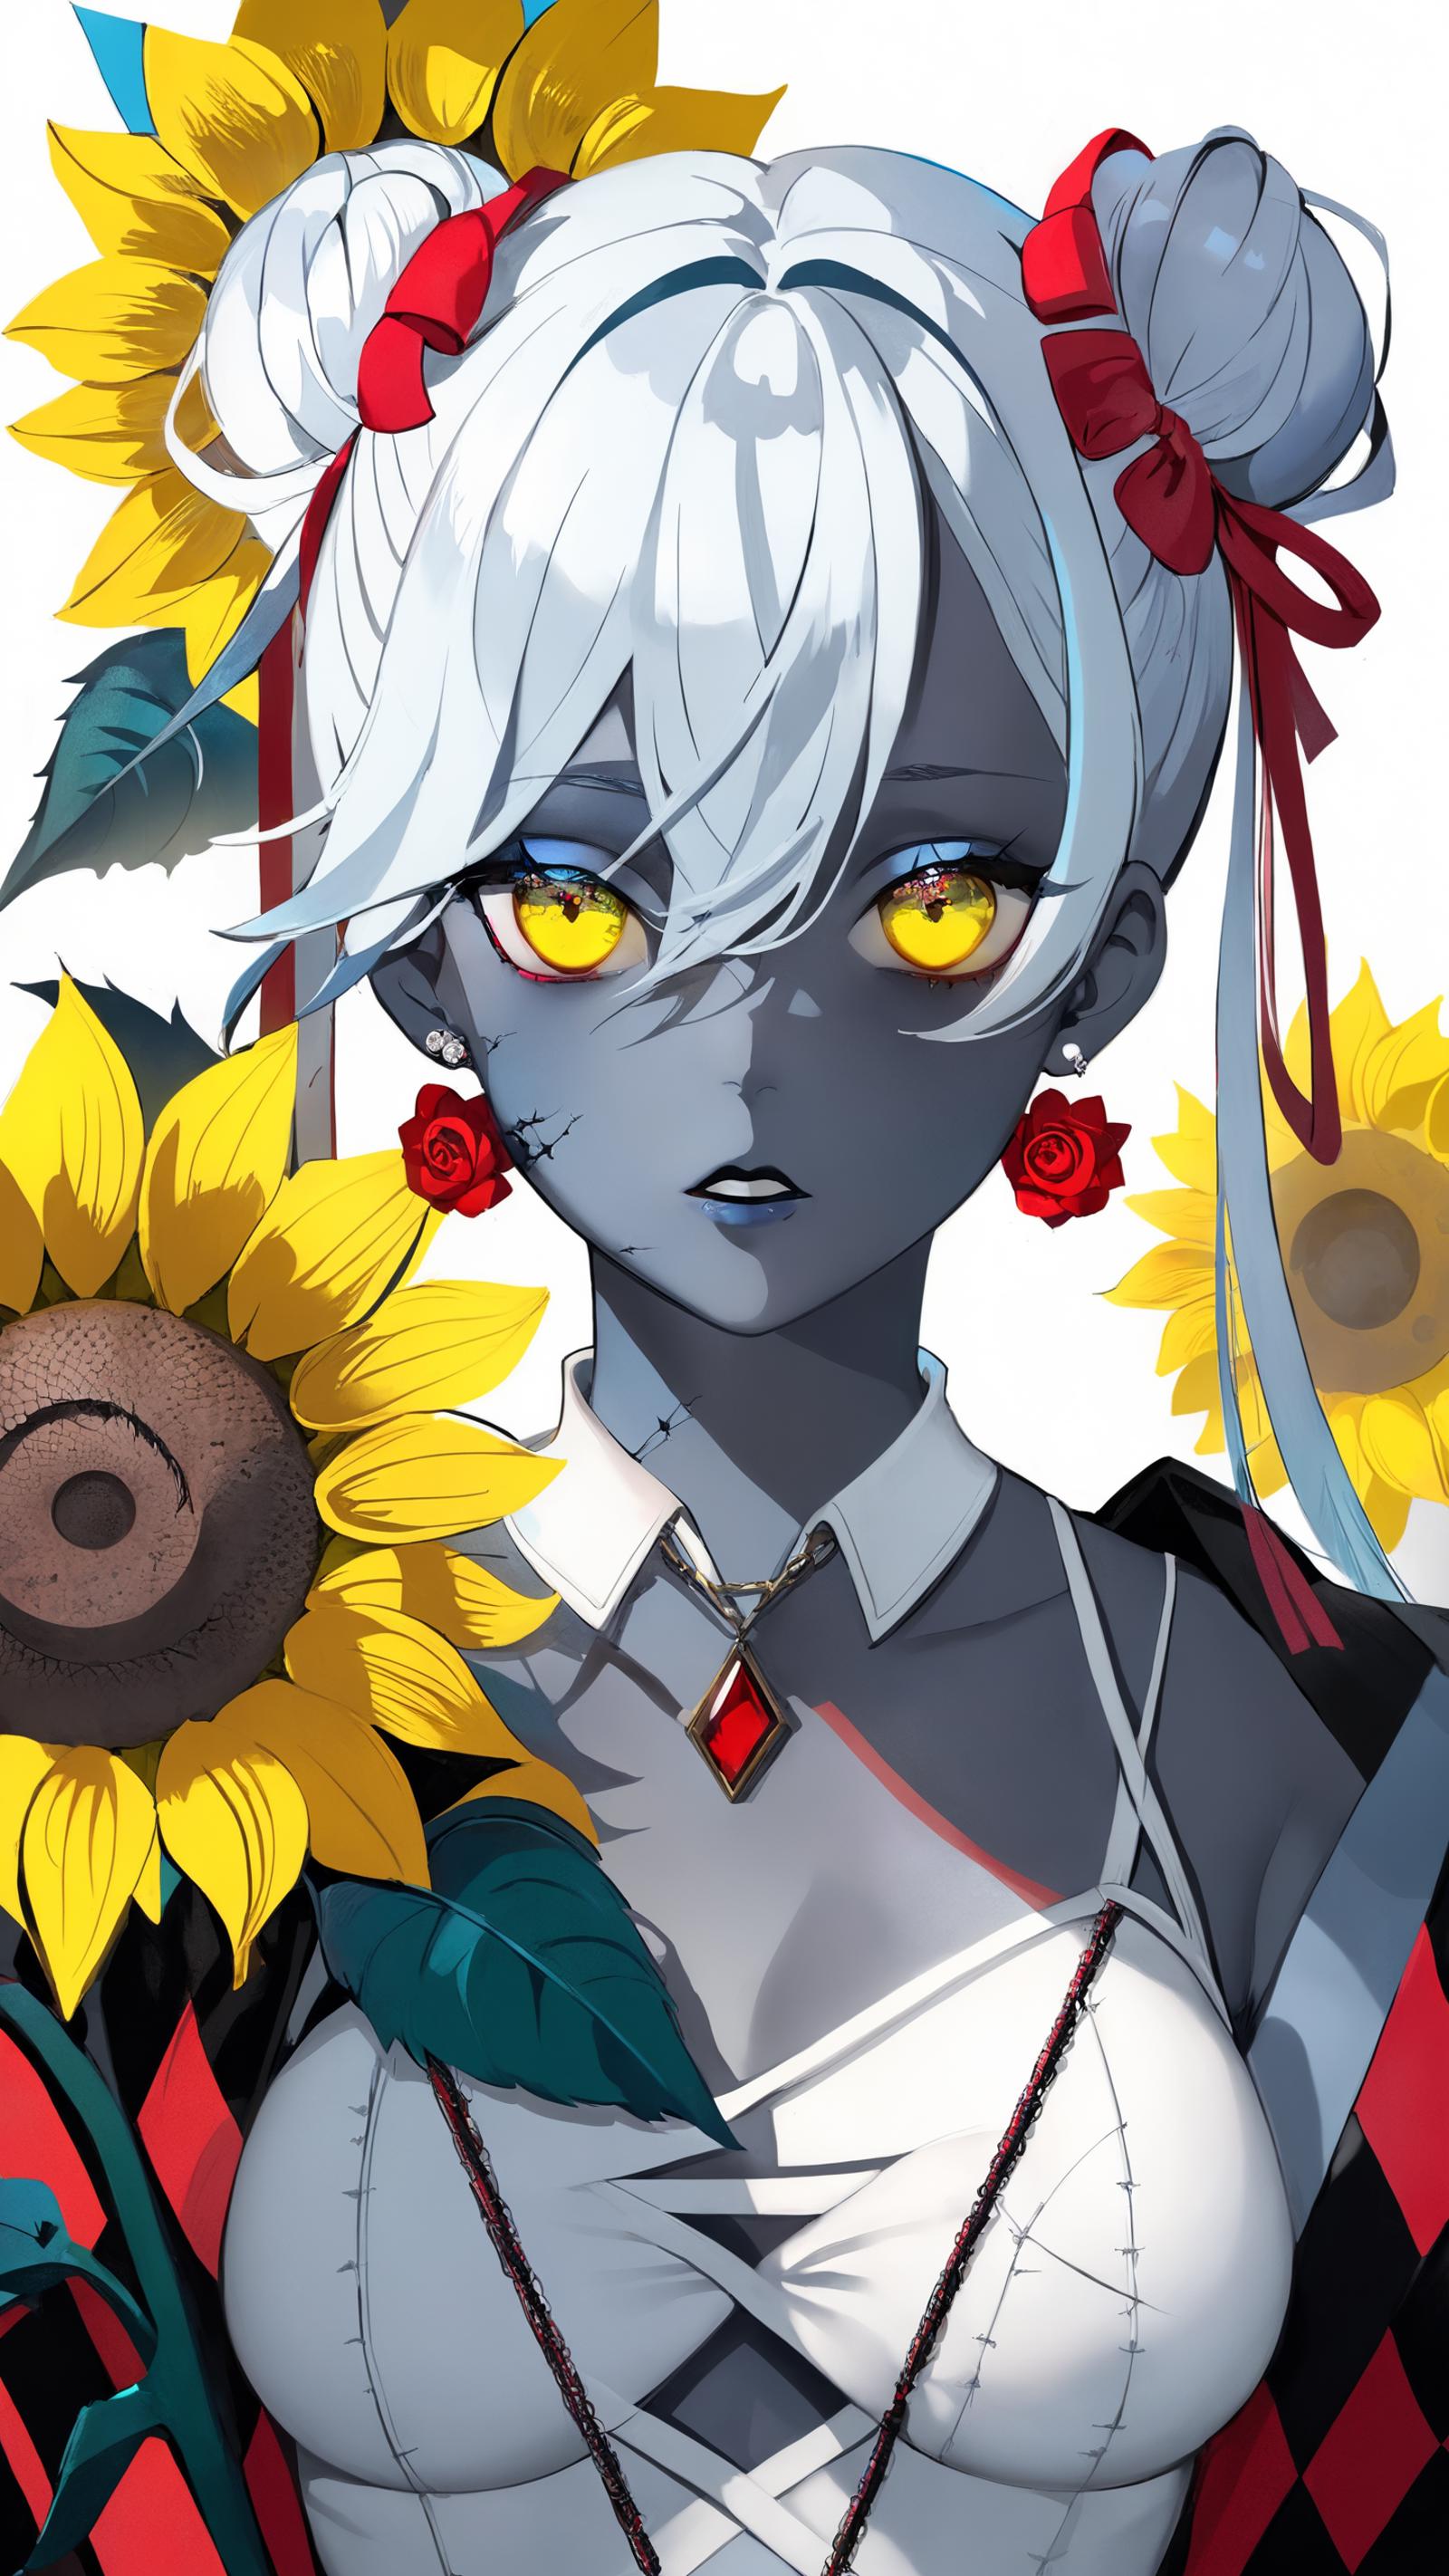 A young girl with yellow eyes holding a sunflower.